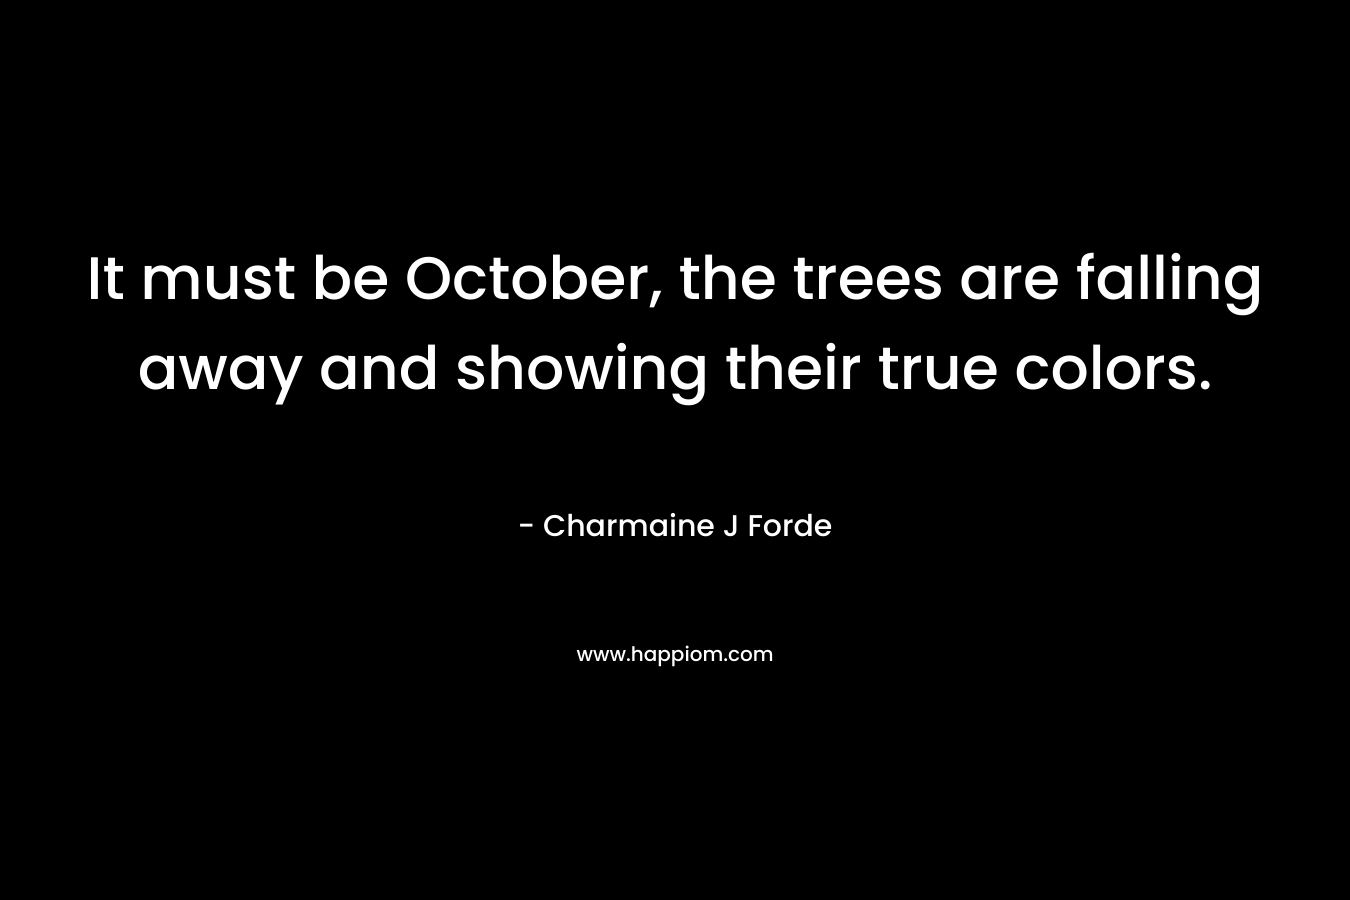 It must be October, the trees are falling away and showing their true colors.